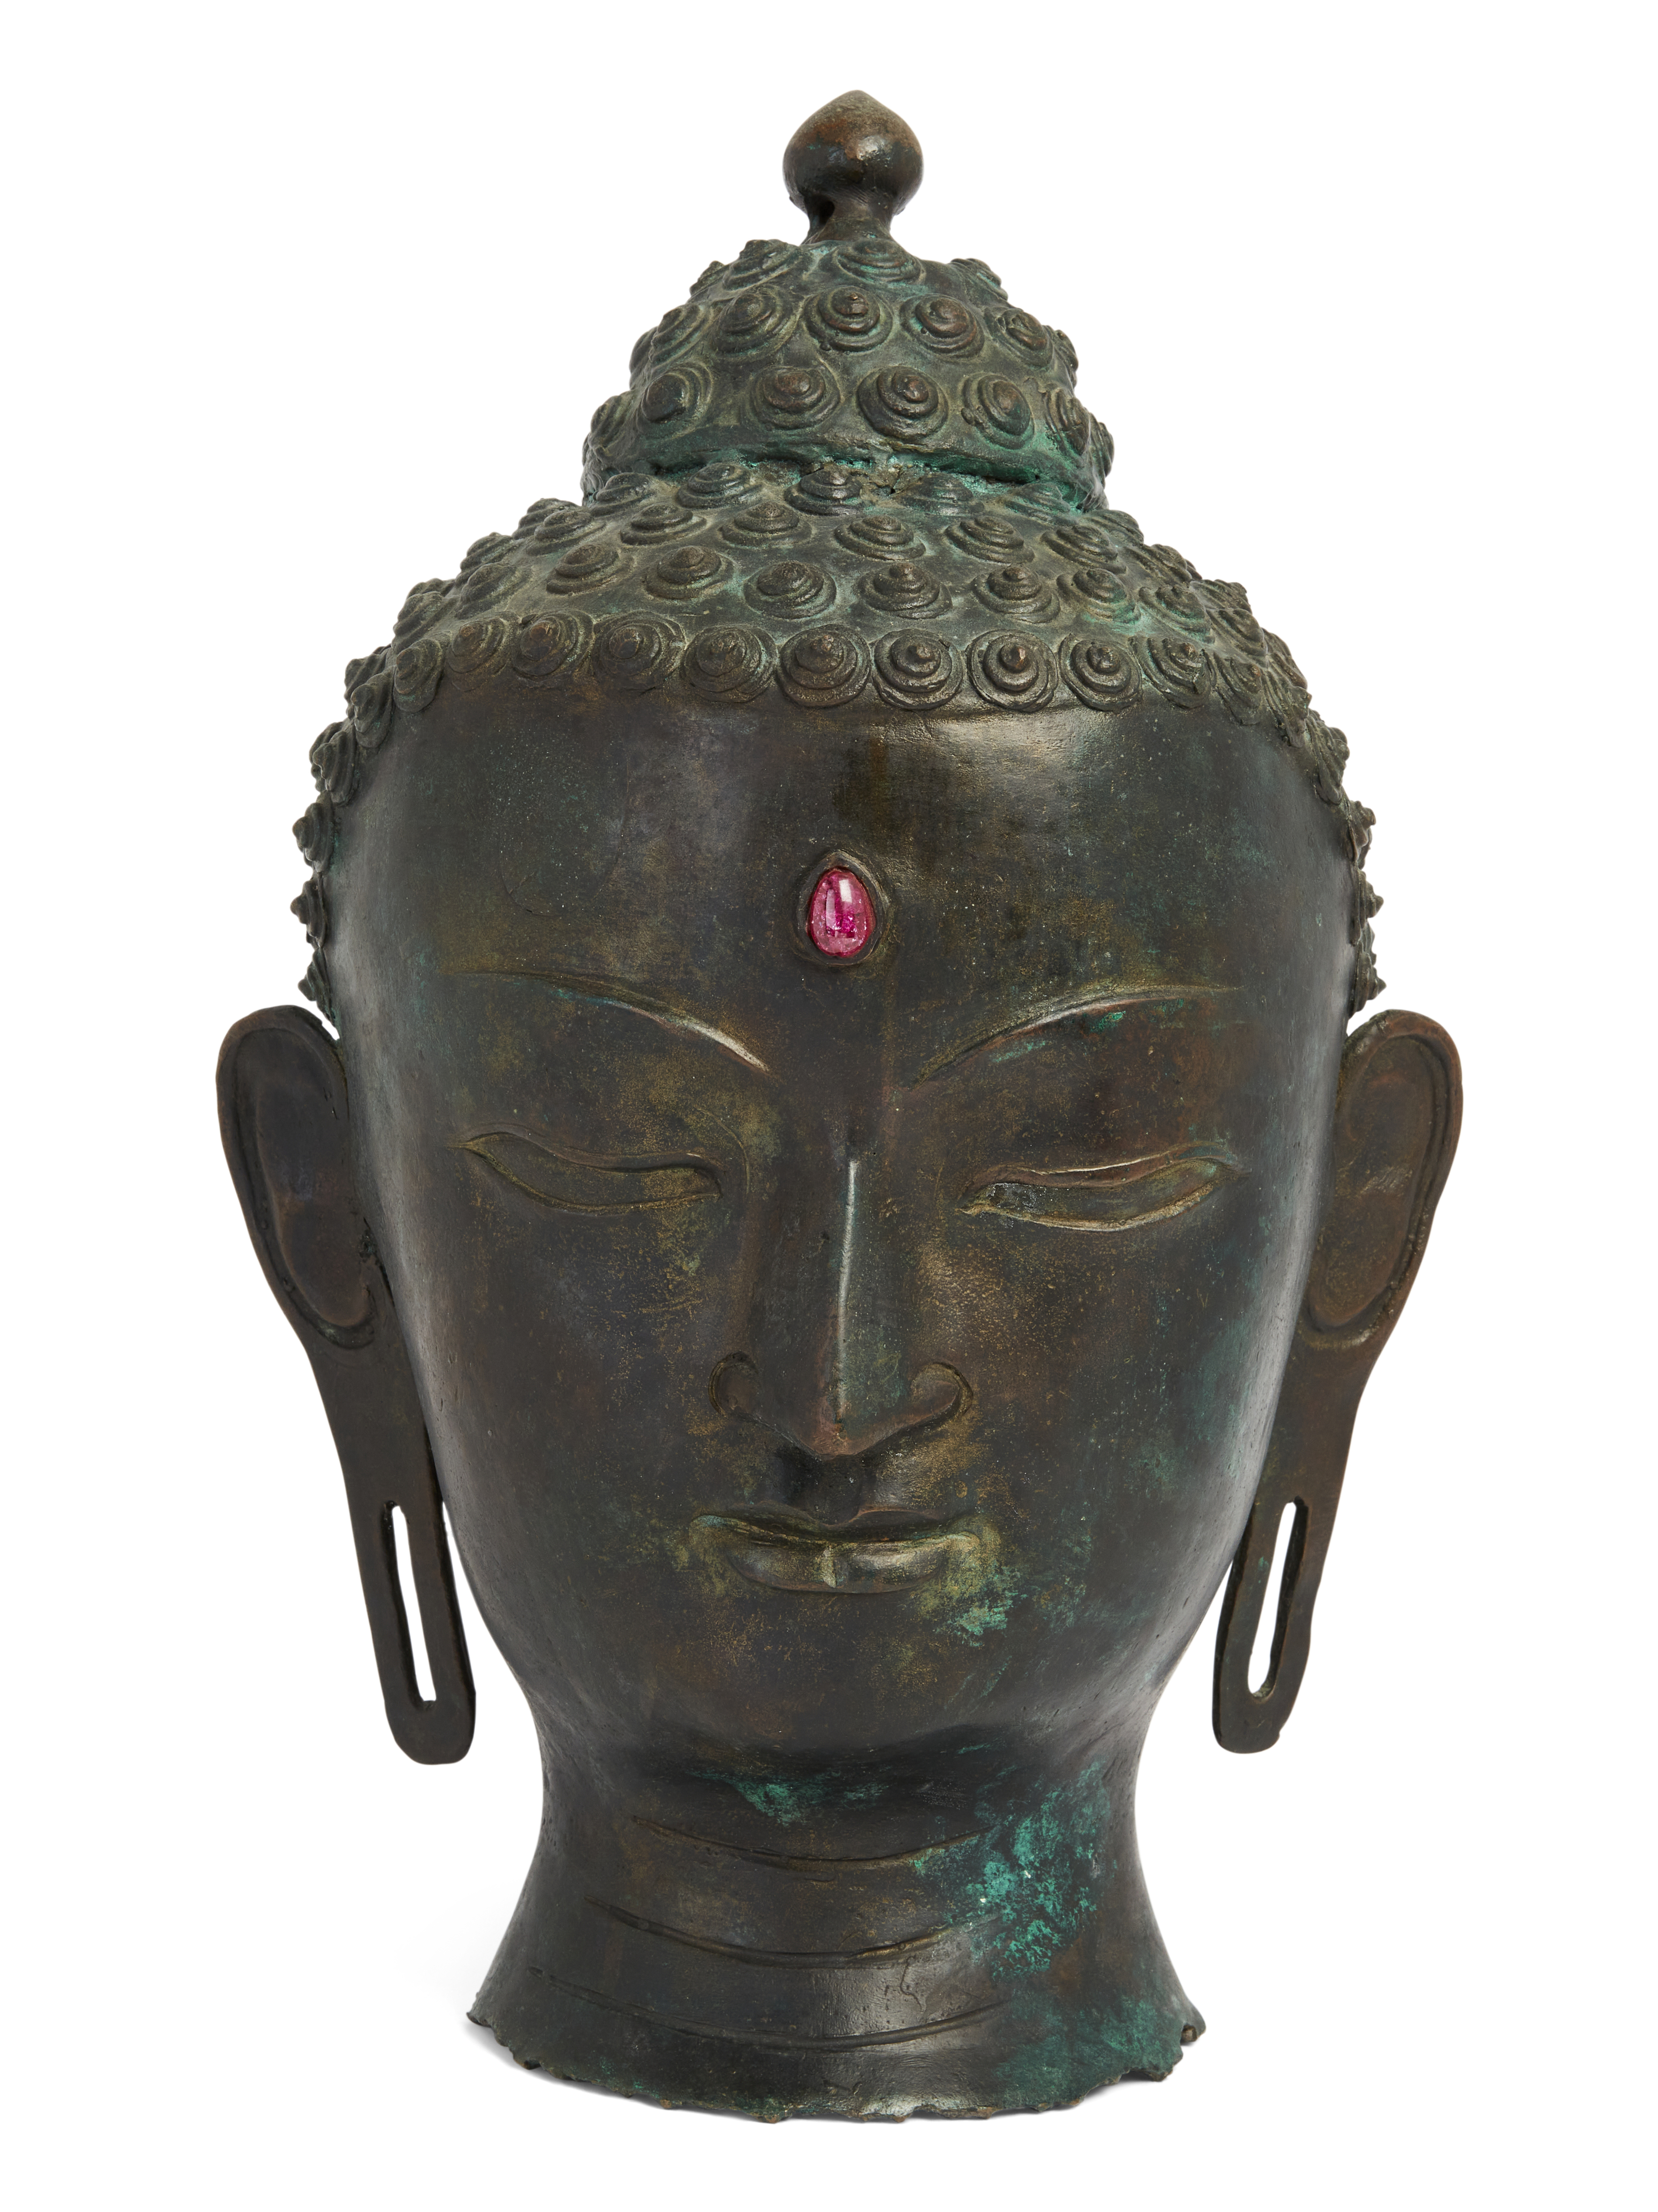 A large Thai bronze head of Buddha, 20th century, Cast with a serene expression, with inset pink ... - Image 2 of 2